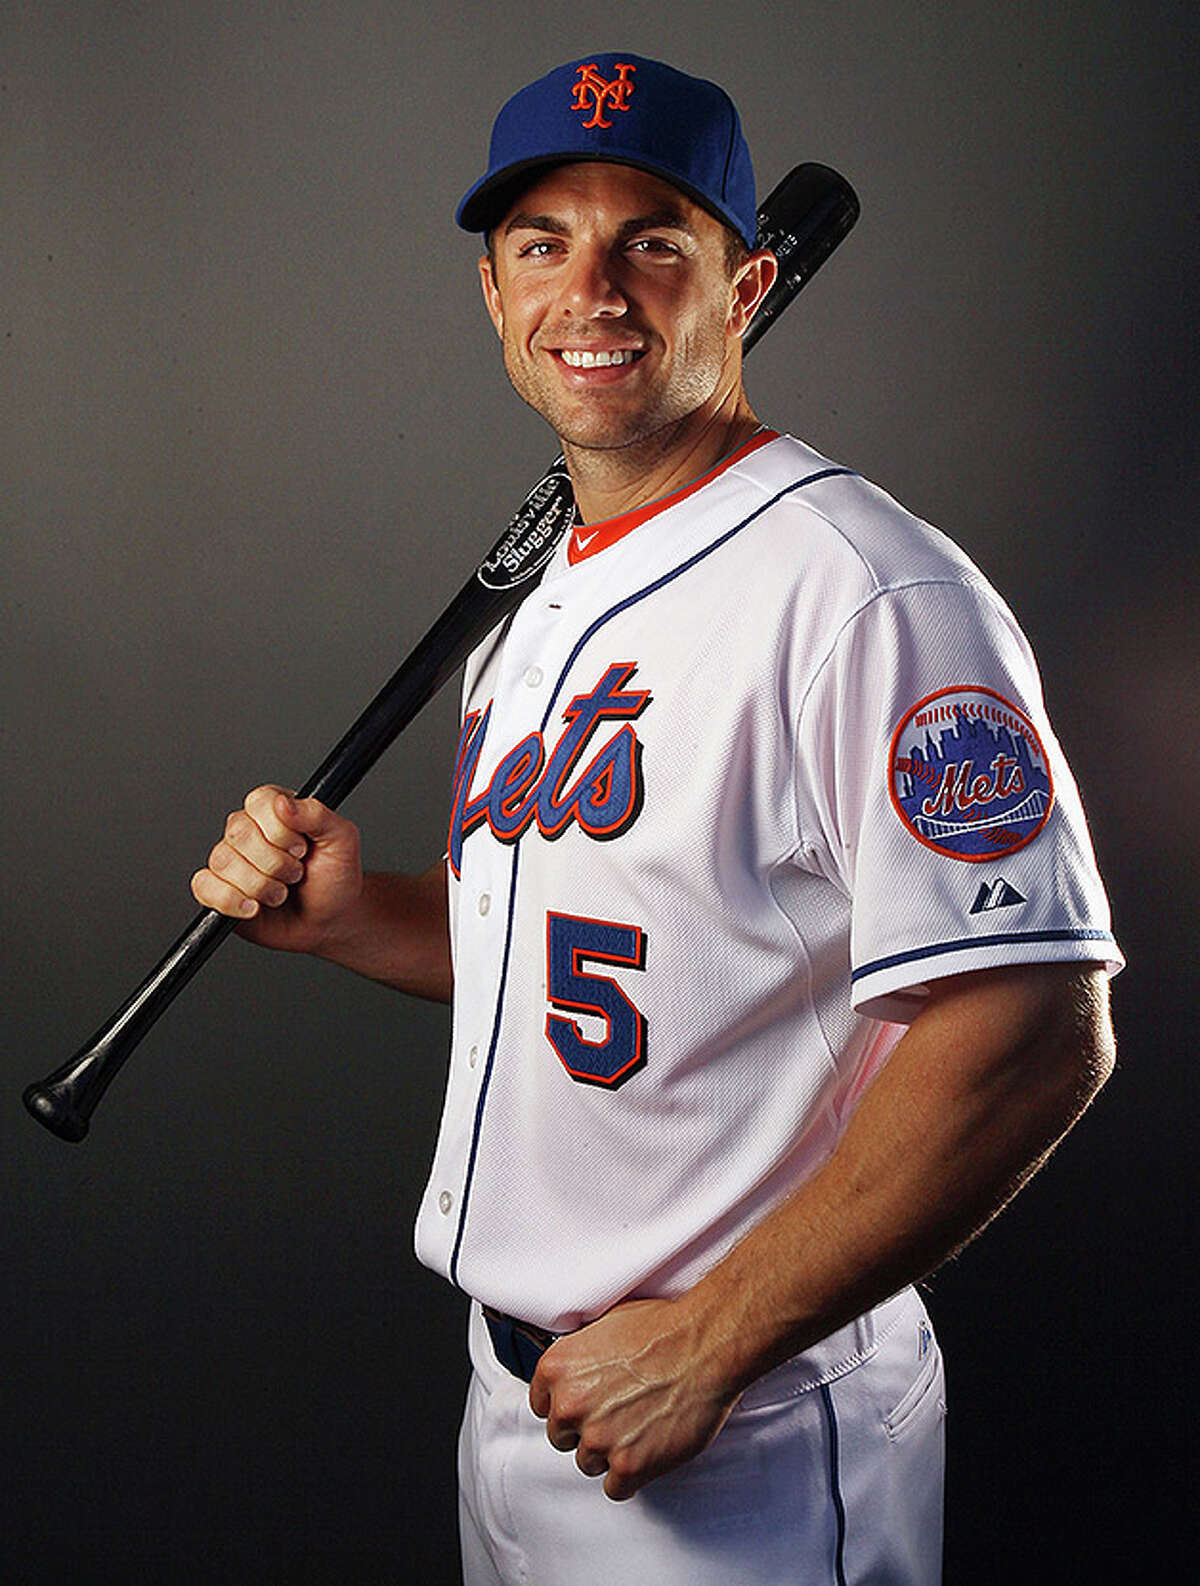 PORT ST. LUCIE, FL - FEBRUARY 24: David Wright # 5 of the New York Mets poses for a portrait during the New York Mets Photo Day on February 24, 2011 at Digital Domain Park in Port St. Lucie, Florida. (Photo by Elsa/Getty Images) *** Local Caption *** David Wright